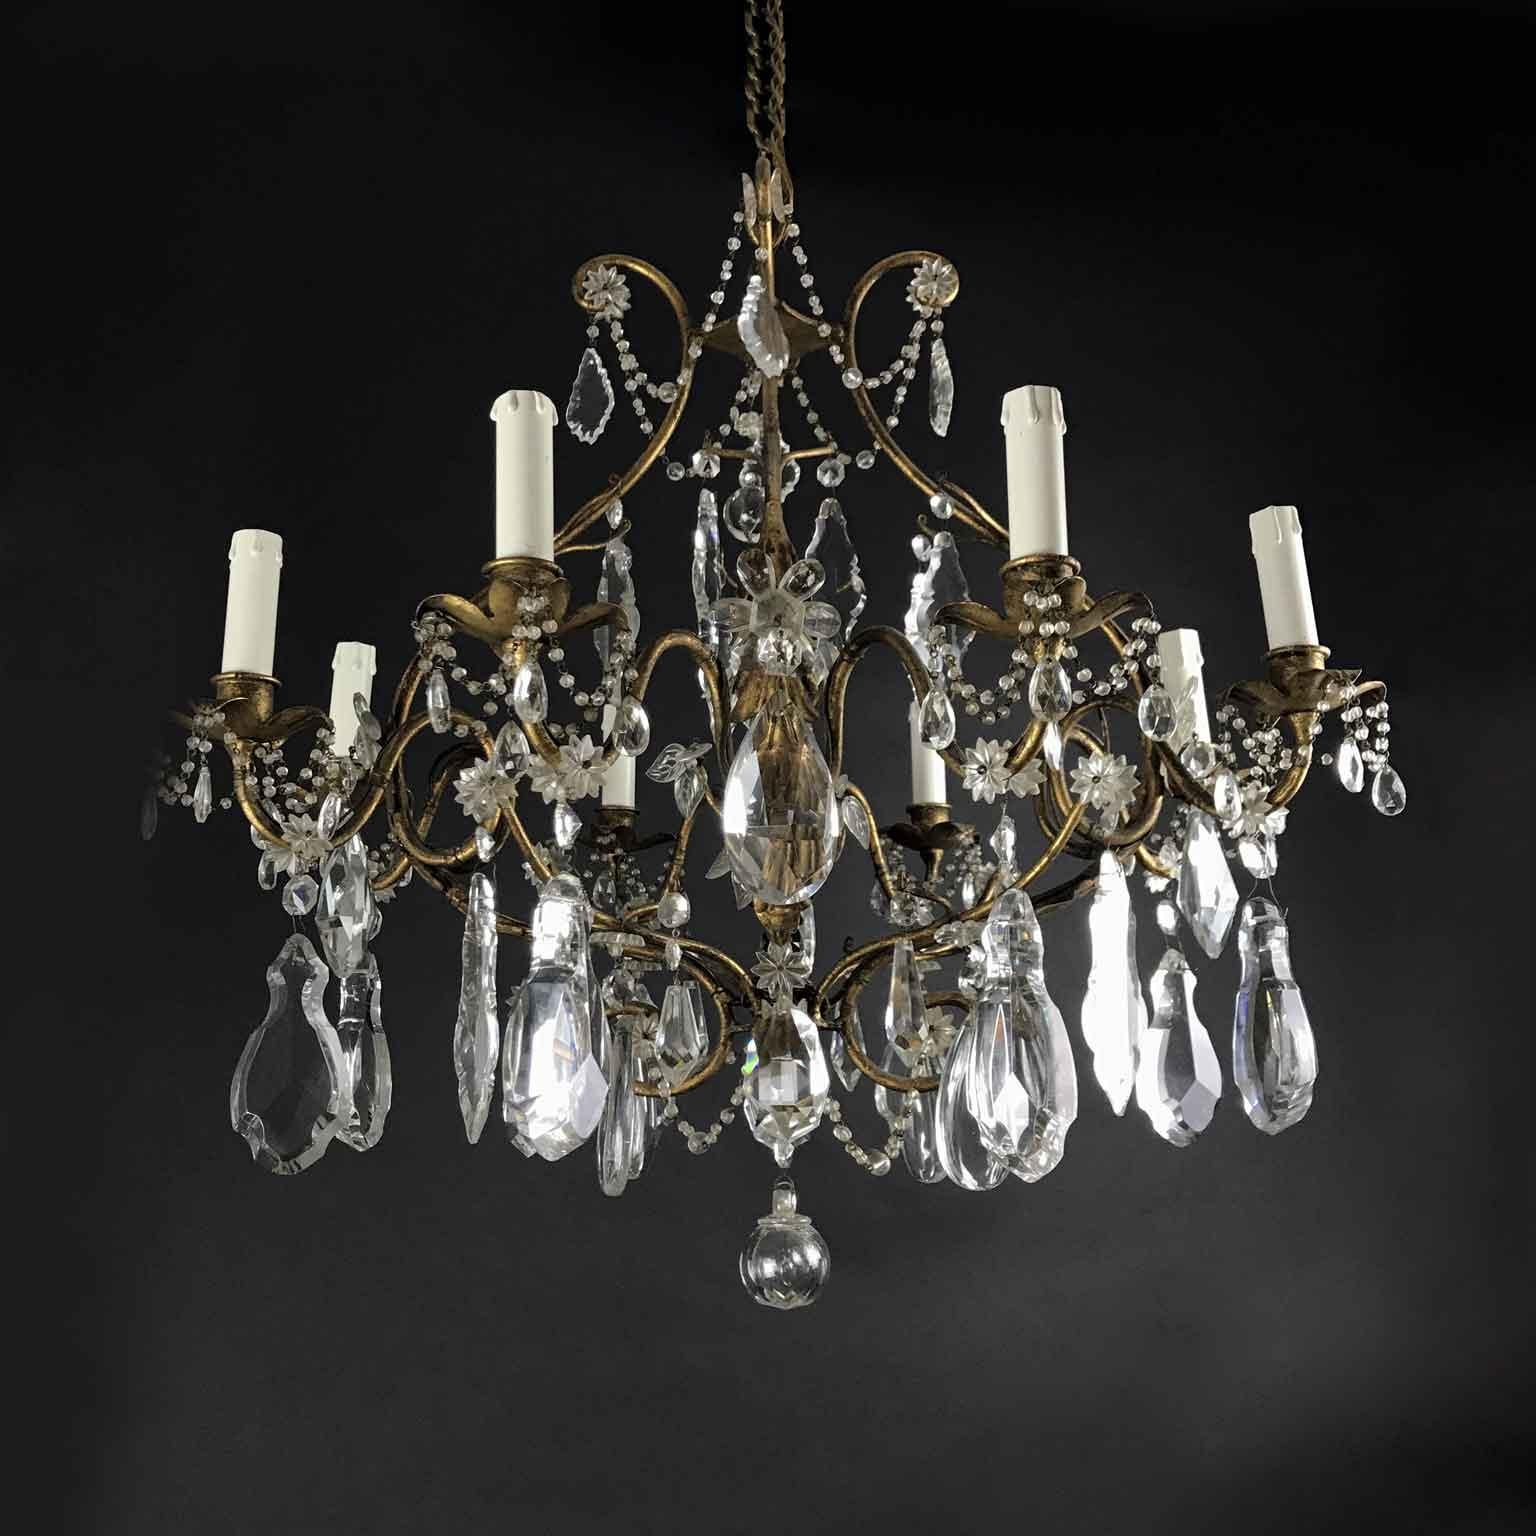 An original eight-light crystal chandelier, circular gilt iron structure, in good condition, with working wiring. Of Italian origin, it comes from a Milanese private palazzo and dates back to mid-20th century.

The cage gilt iron structure is